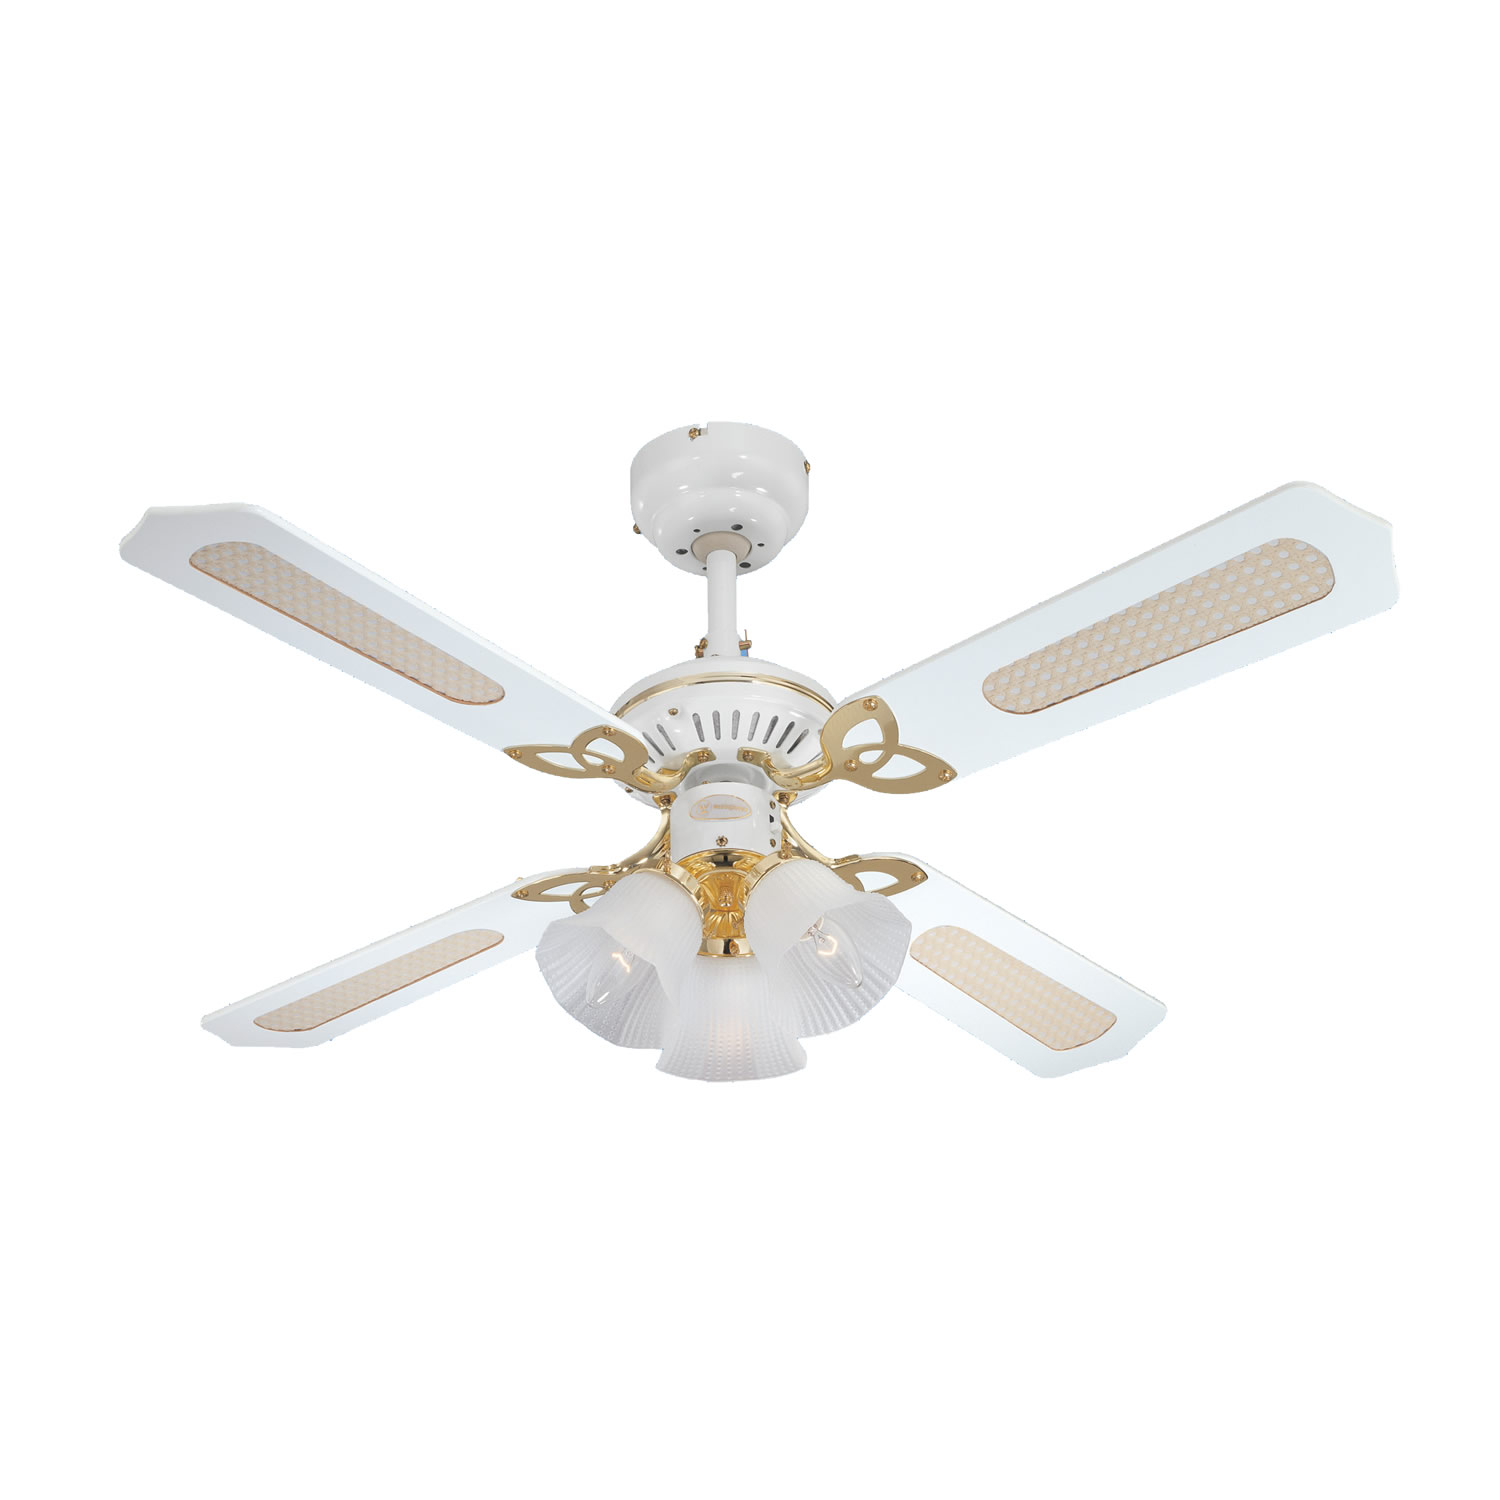 White Ceiling Fan With Lights Images &amp; Pictures - Becuo